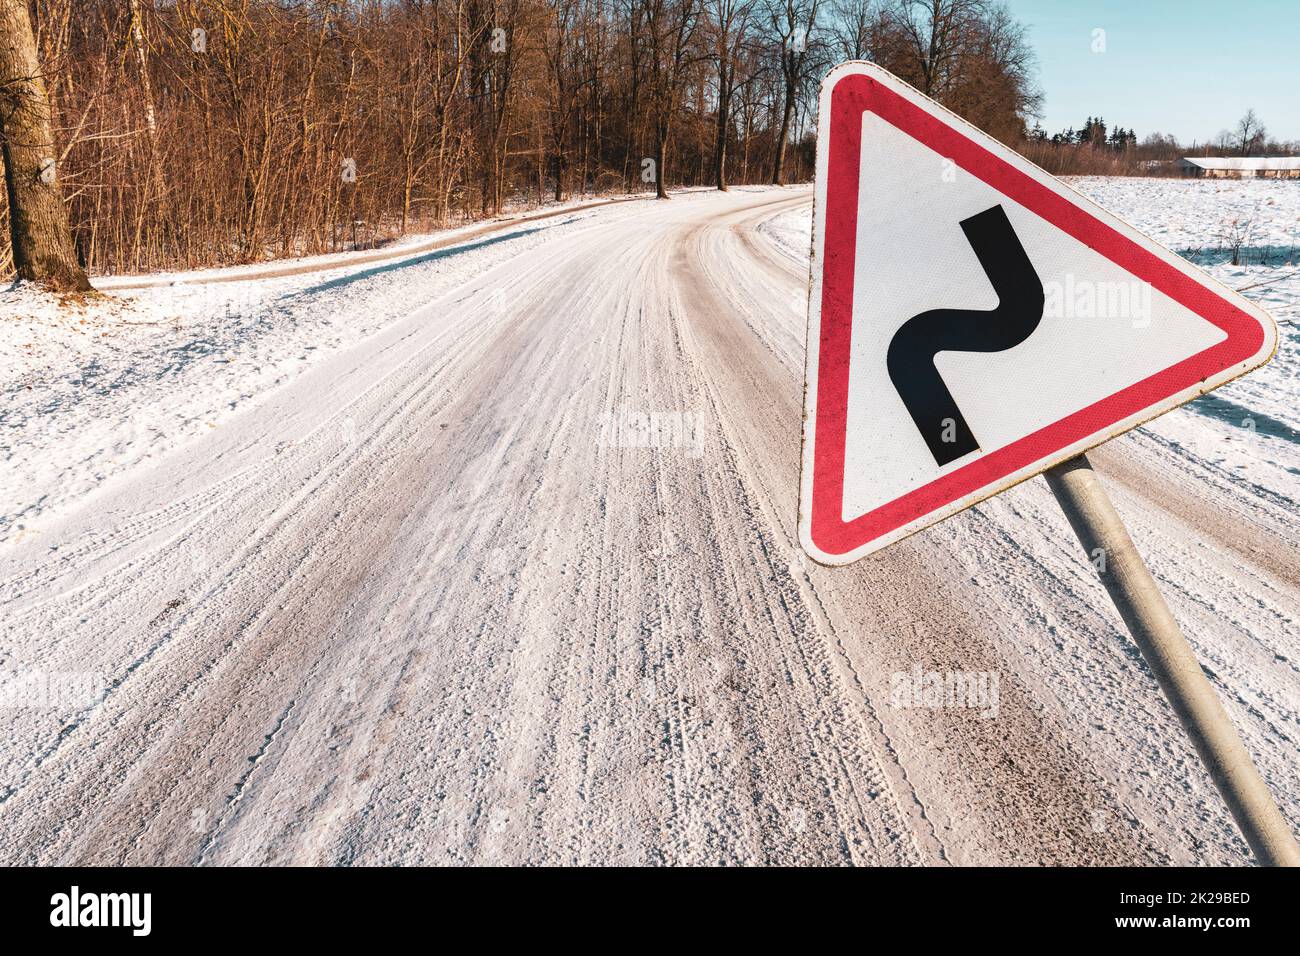 Warning traffic sign next to the winter route Stock Photo